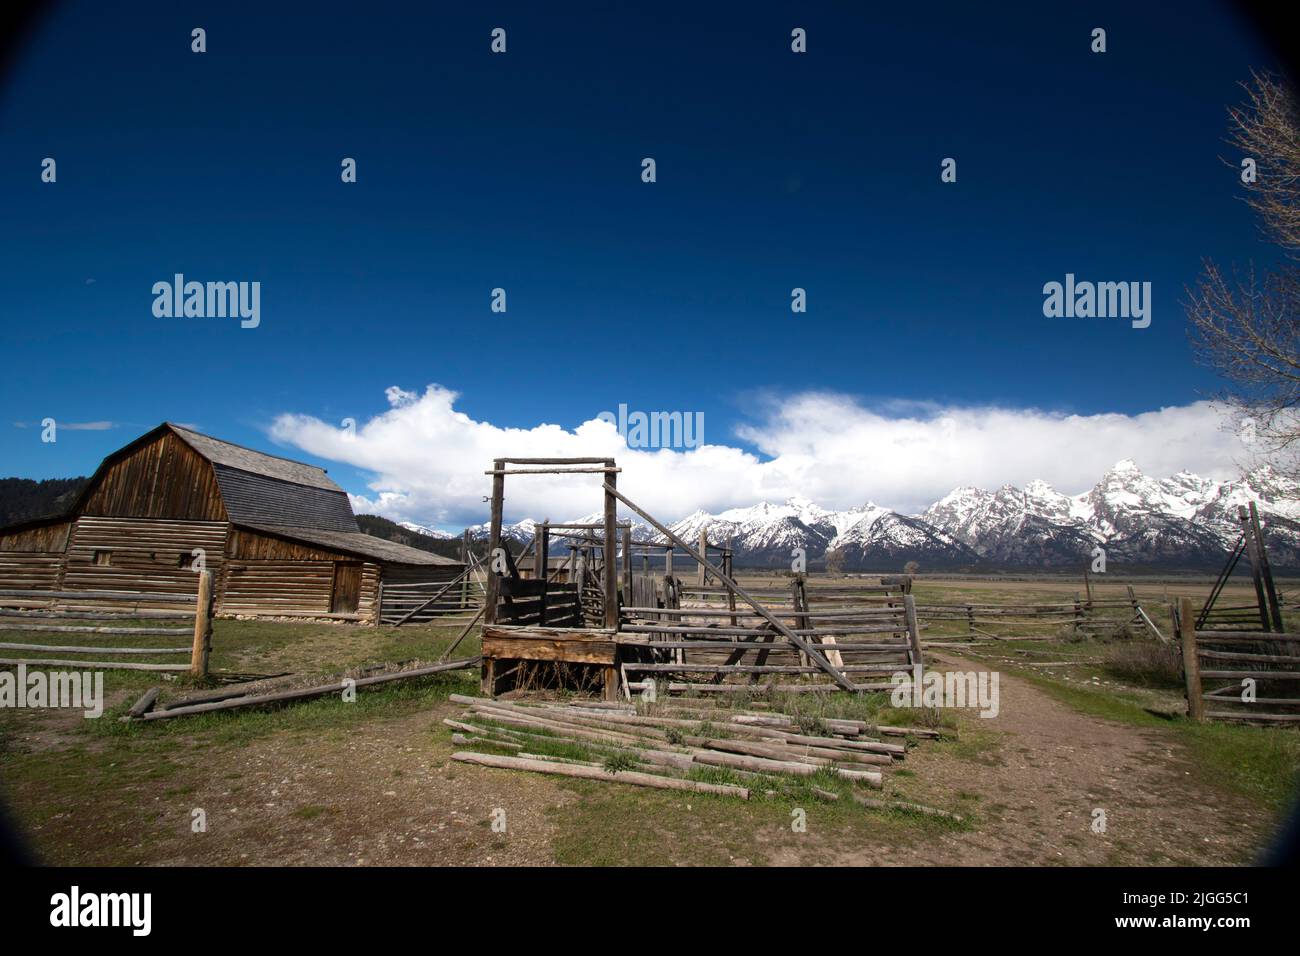 The snow-covered Teton Range forms a scenic backdrop for the historic Mormon Row barns in Grand Teton NP, WY. Stock Photo